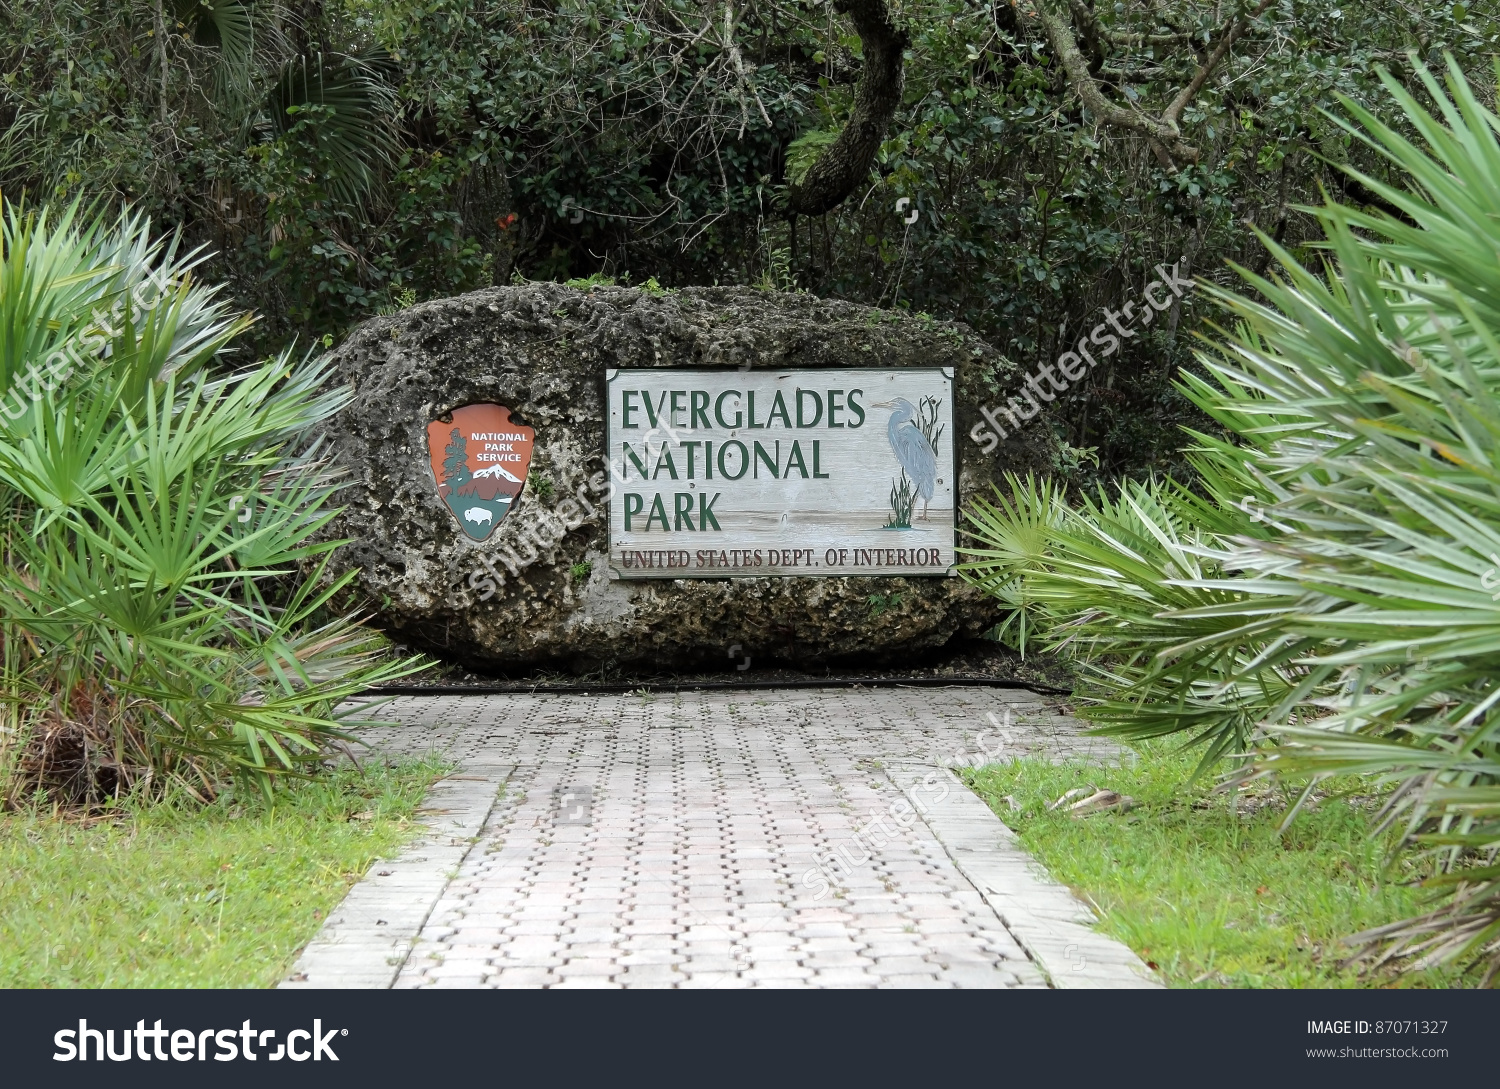 Everglades National Park clipart #10, Download drawings